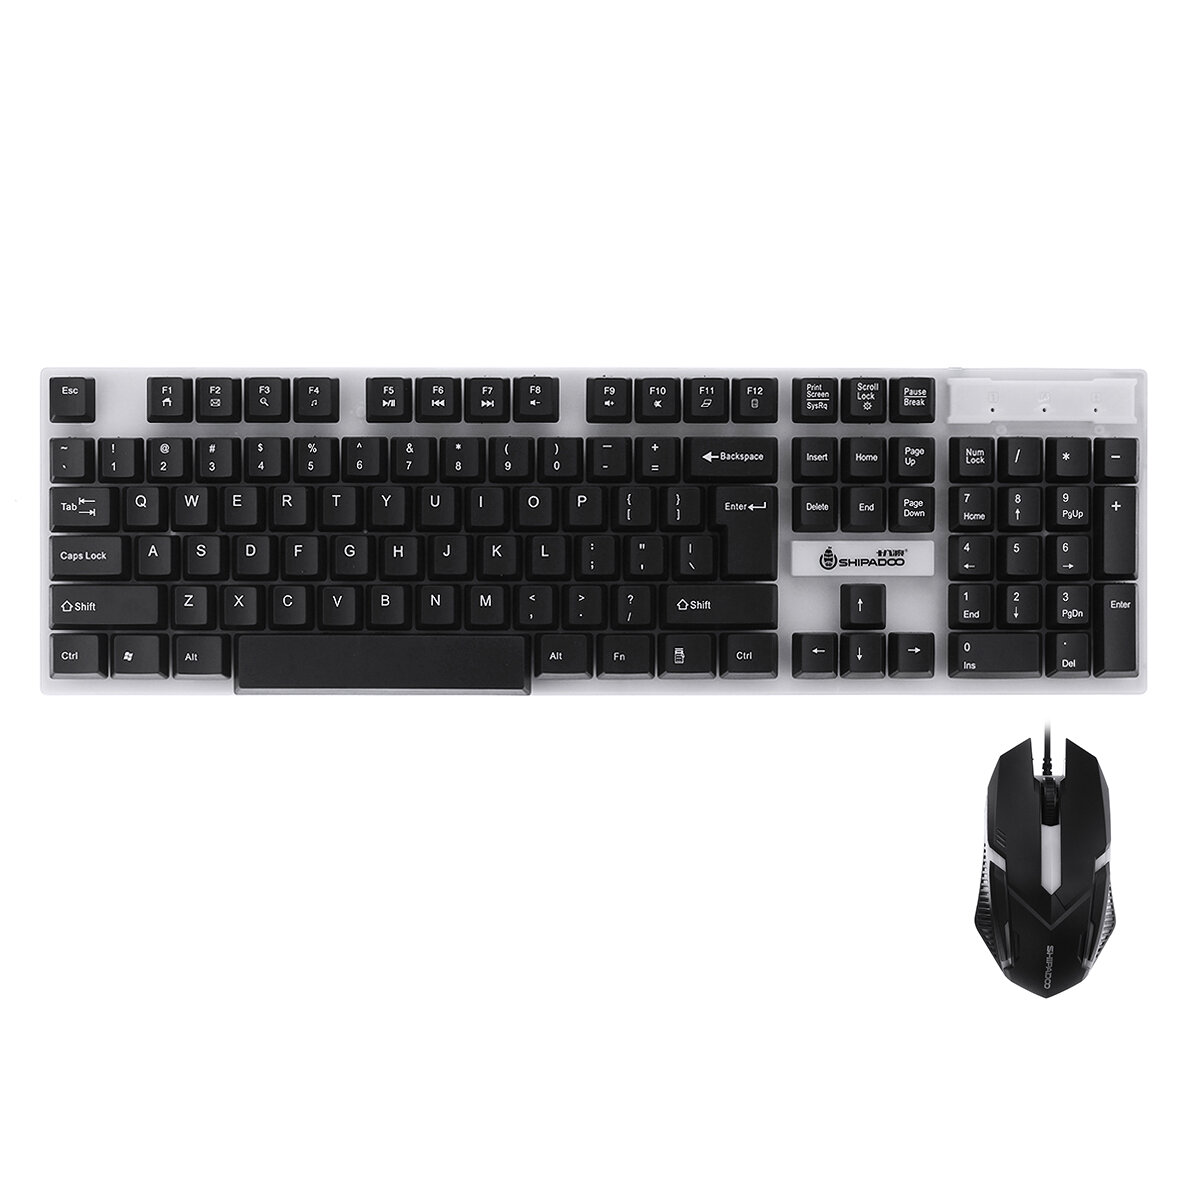 

104 Keys RGB Backlit Wired Gaming Keyboard and 1600 DPI Gaming Mouse Set for PC Laptop